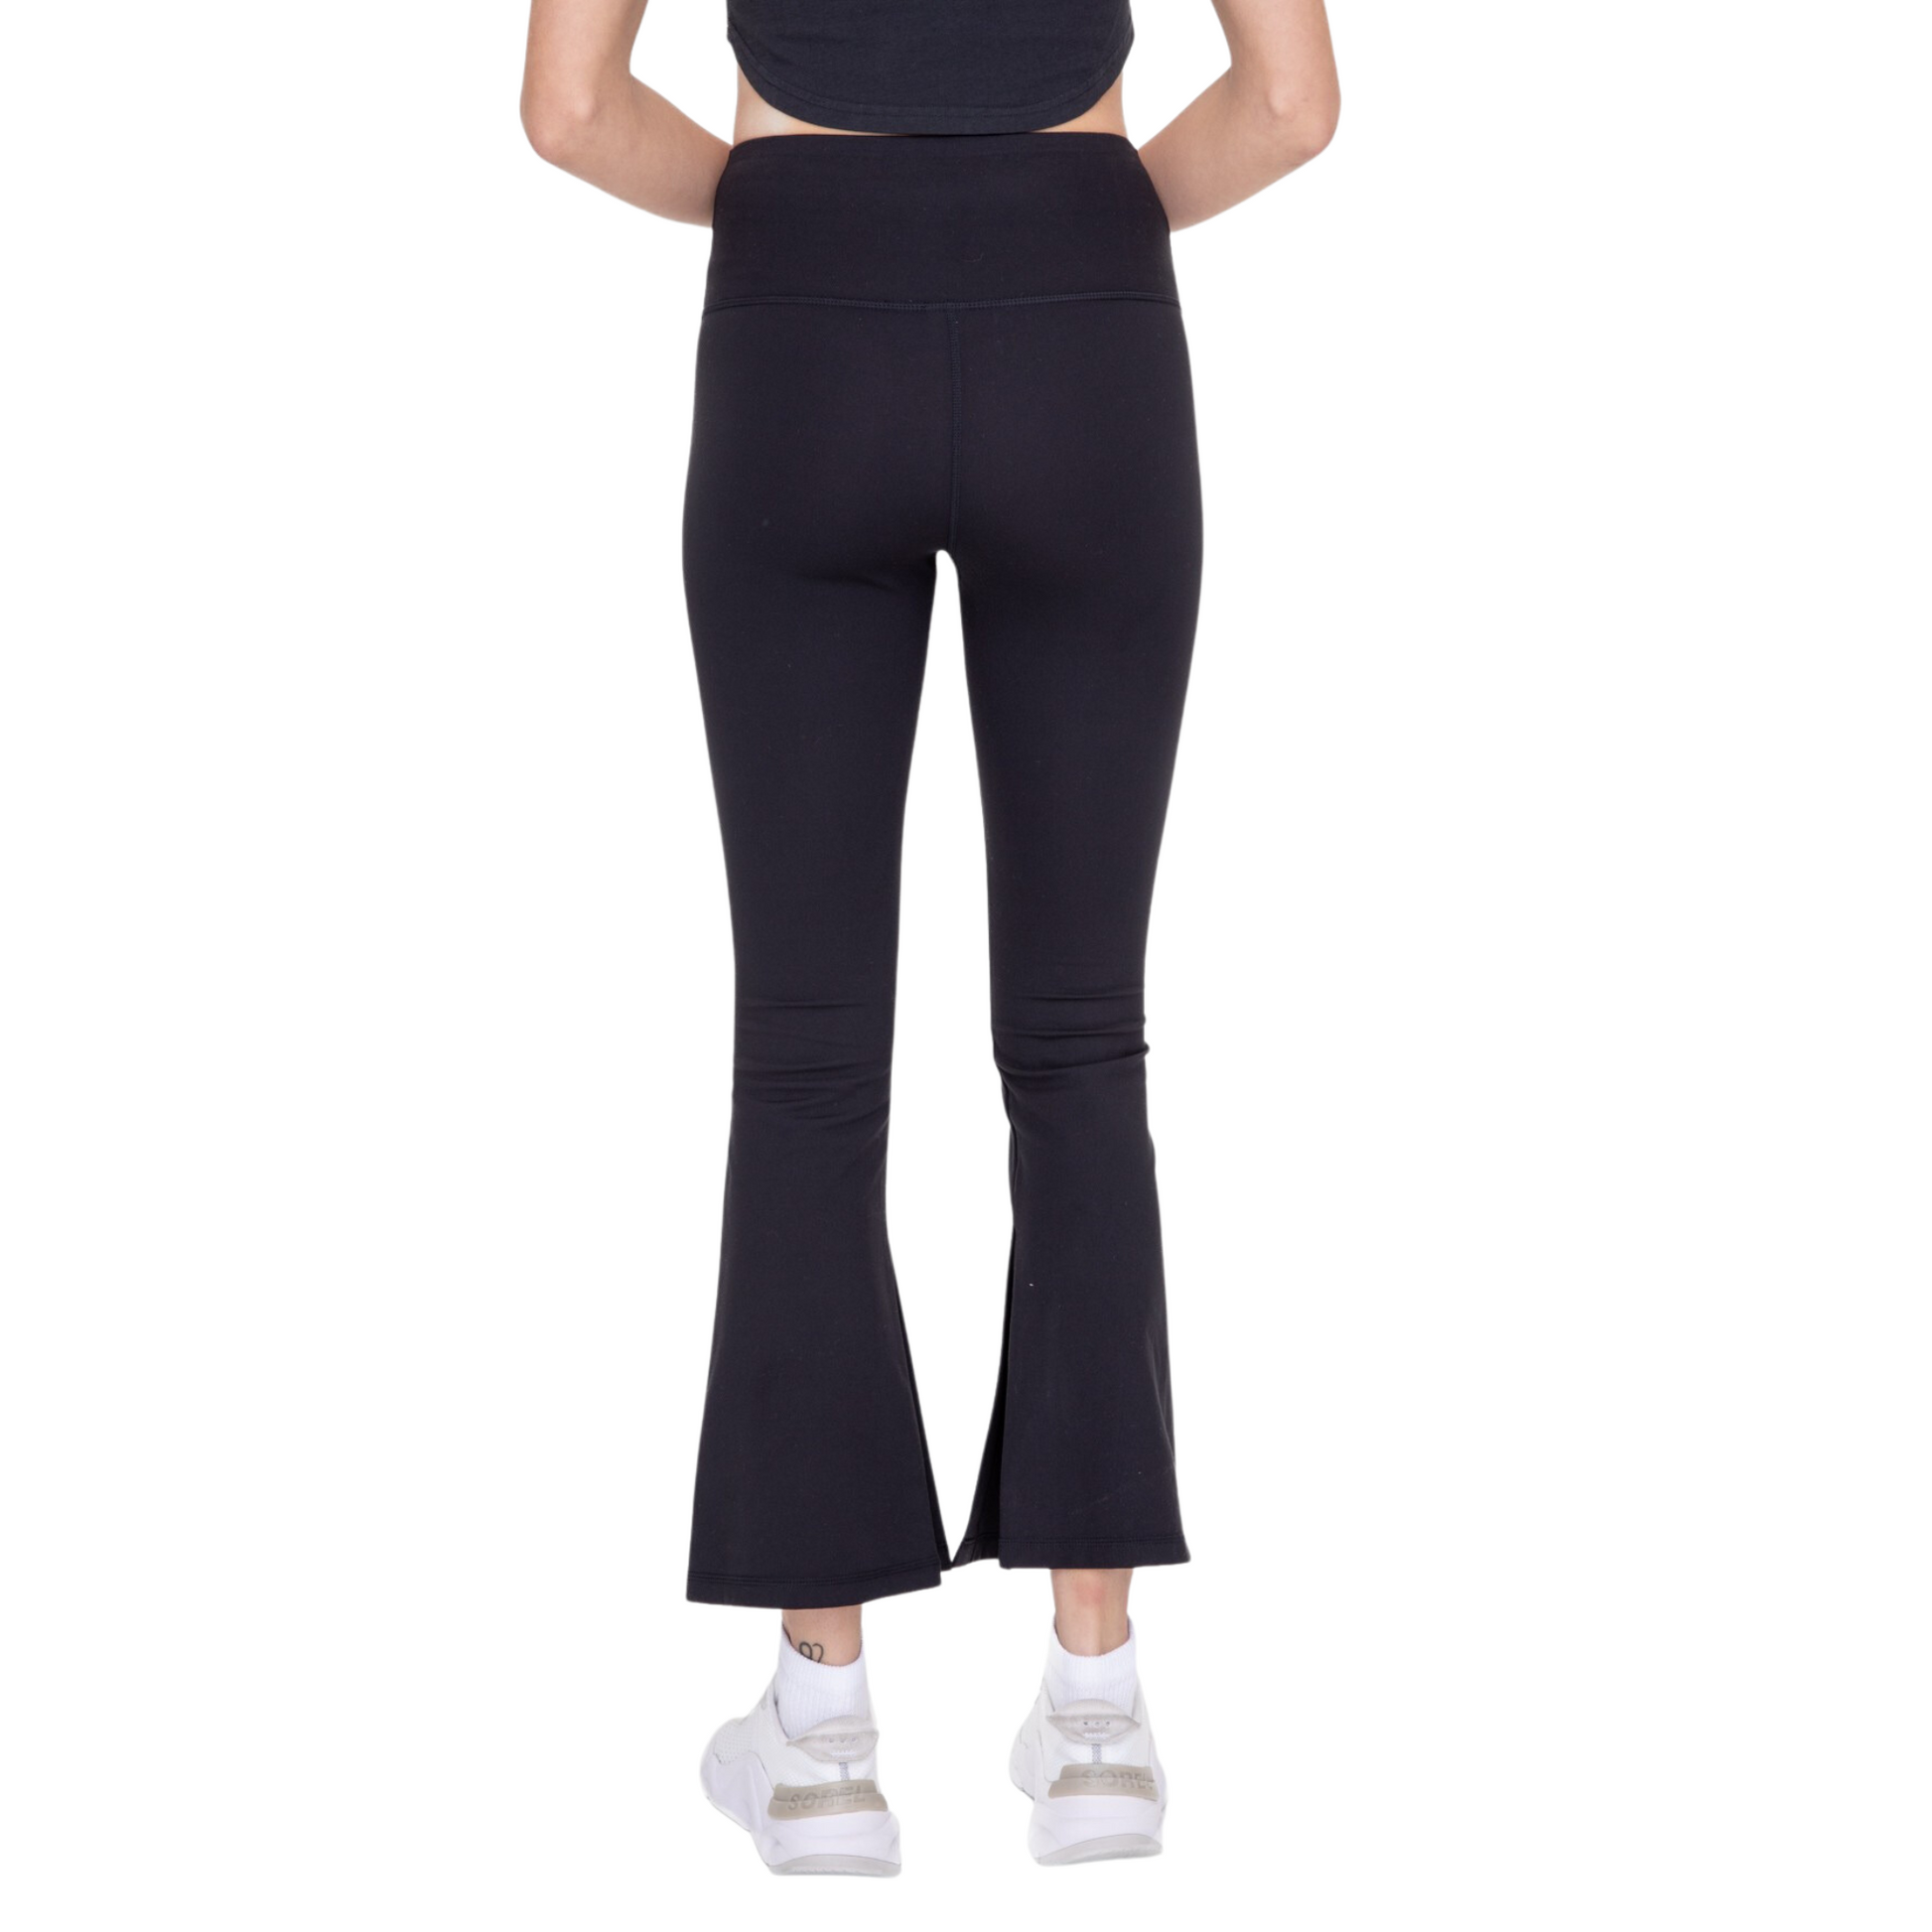 These essential high waist flare Plus size leggings crafted from recycled polyester and woven with spandex give a figure-hugging fit that will instantly flatter your curves. Get the hourglass look effortlessly with this stylish black design.